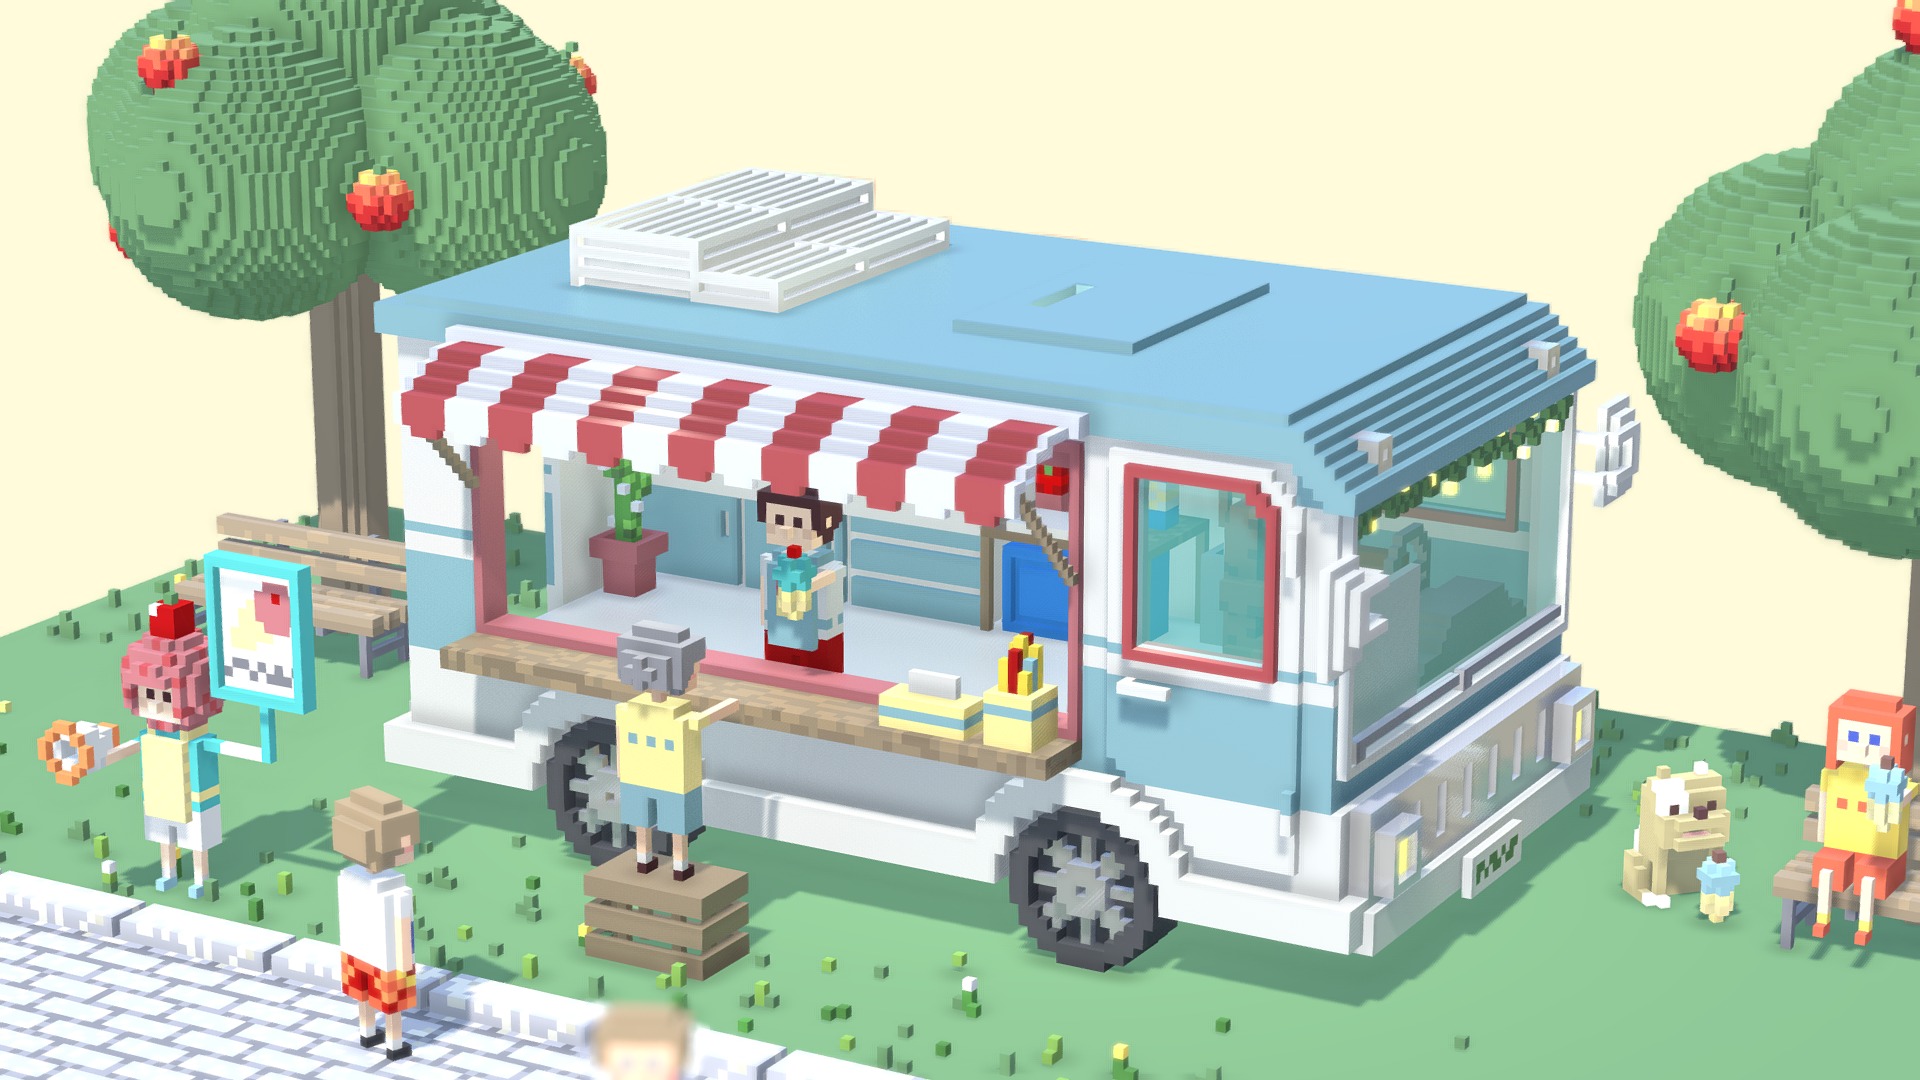 3D model voxel Icecream truck park - This is a 3D model of the voxel Icecream truck park. The 3D model is about a toy house with a tree and a train track.